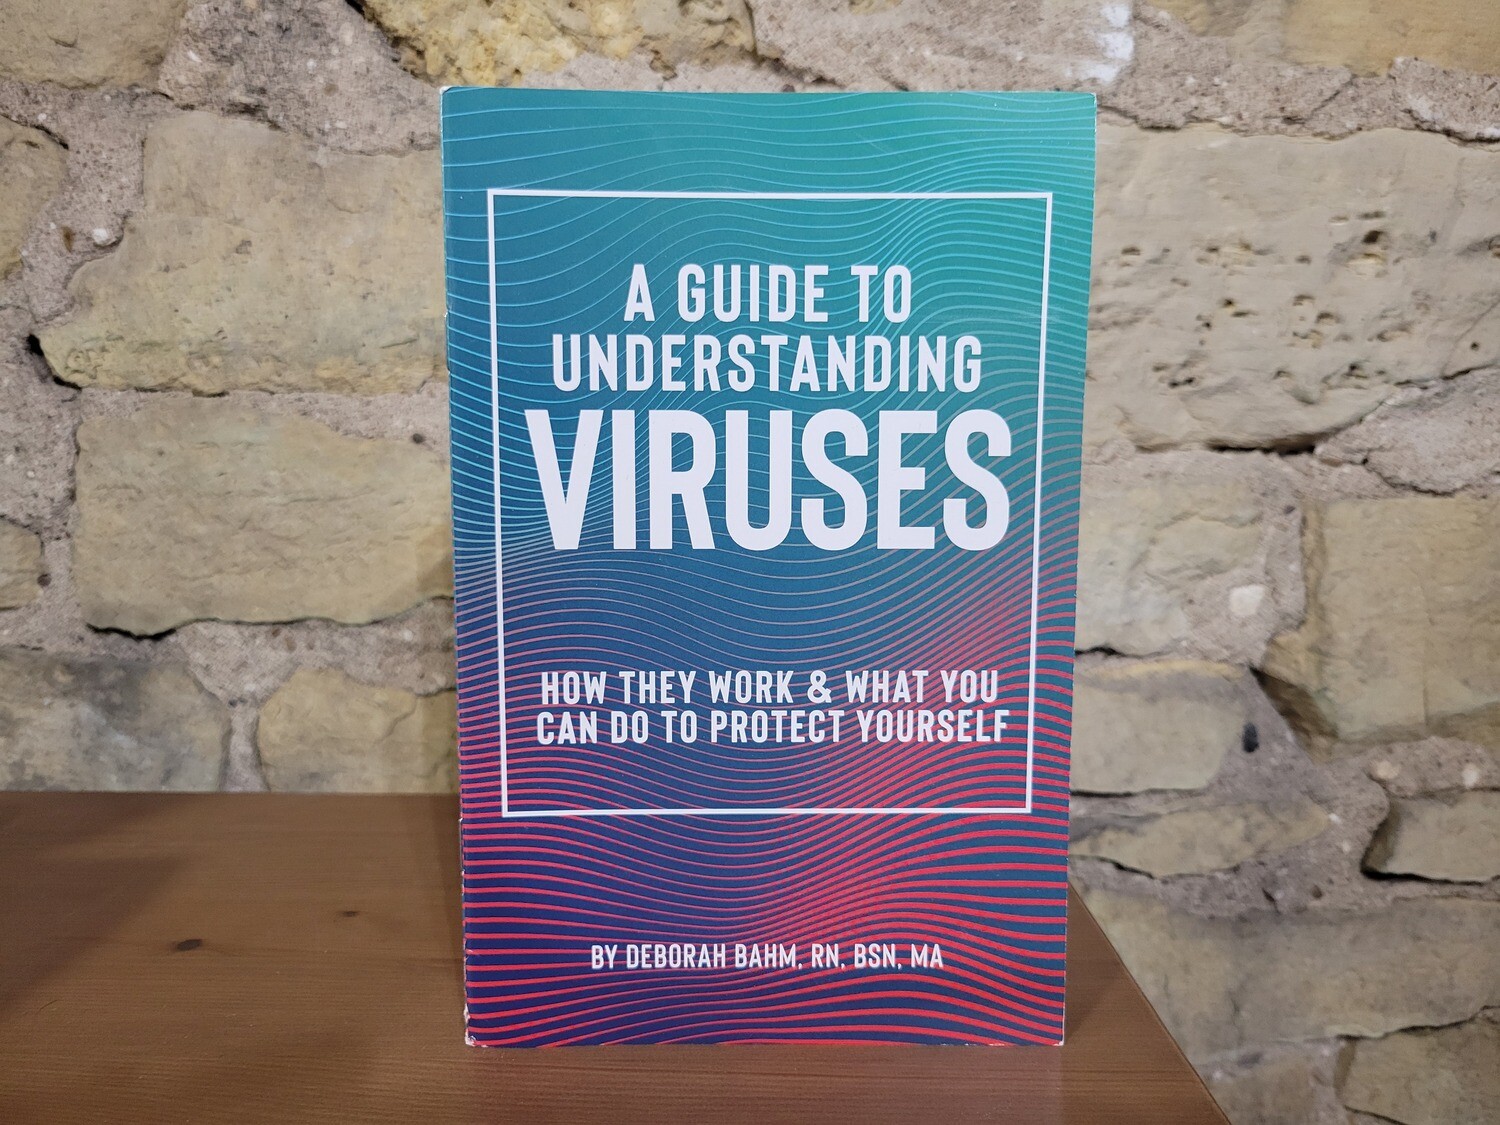 A Guide To Understanding Viruses